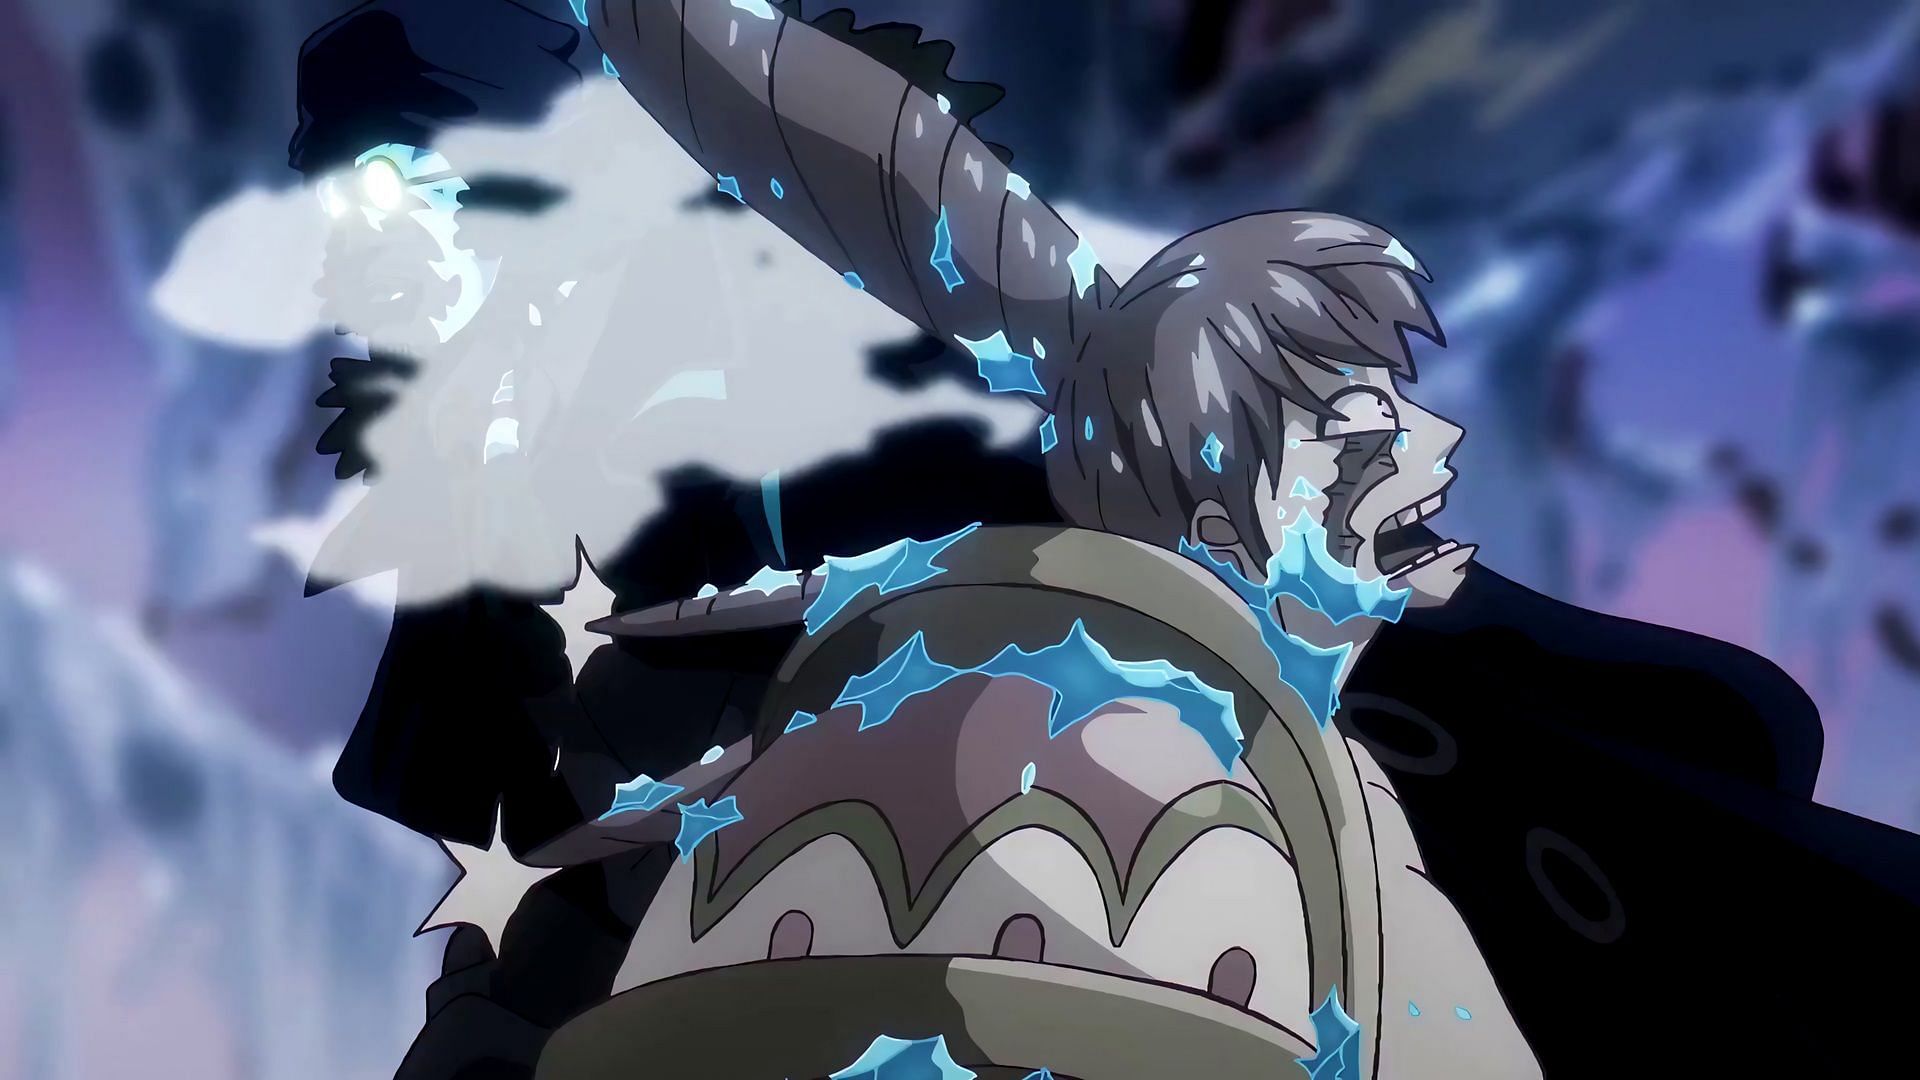 Cracker&#039;s defeat against Kuzan as seen in the One Piece anime (Image via Toei Animation)